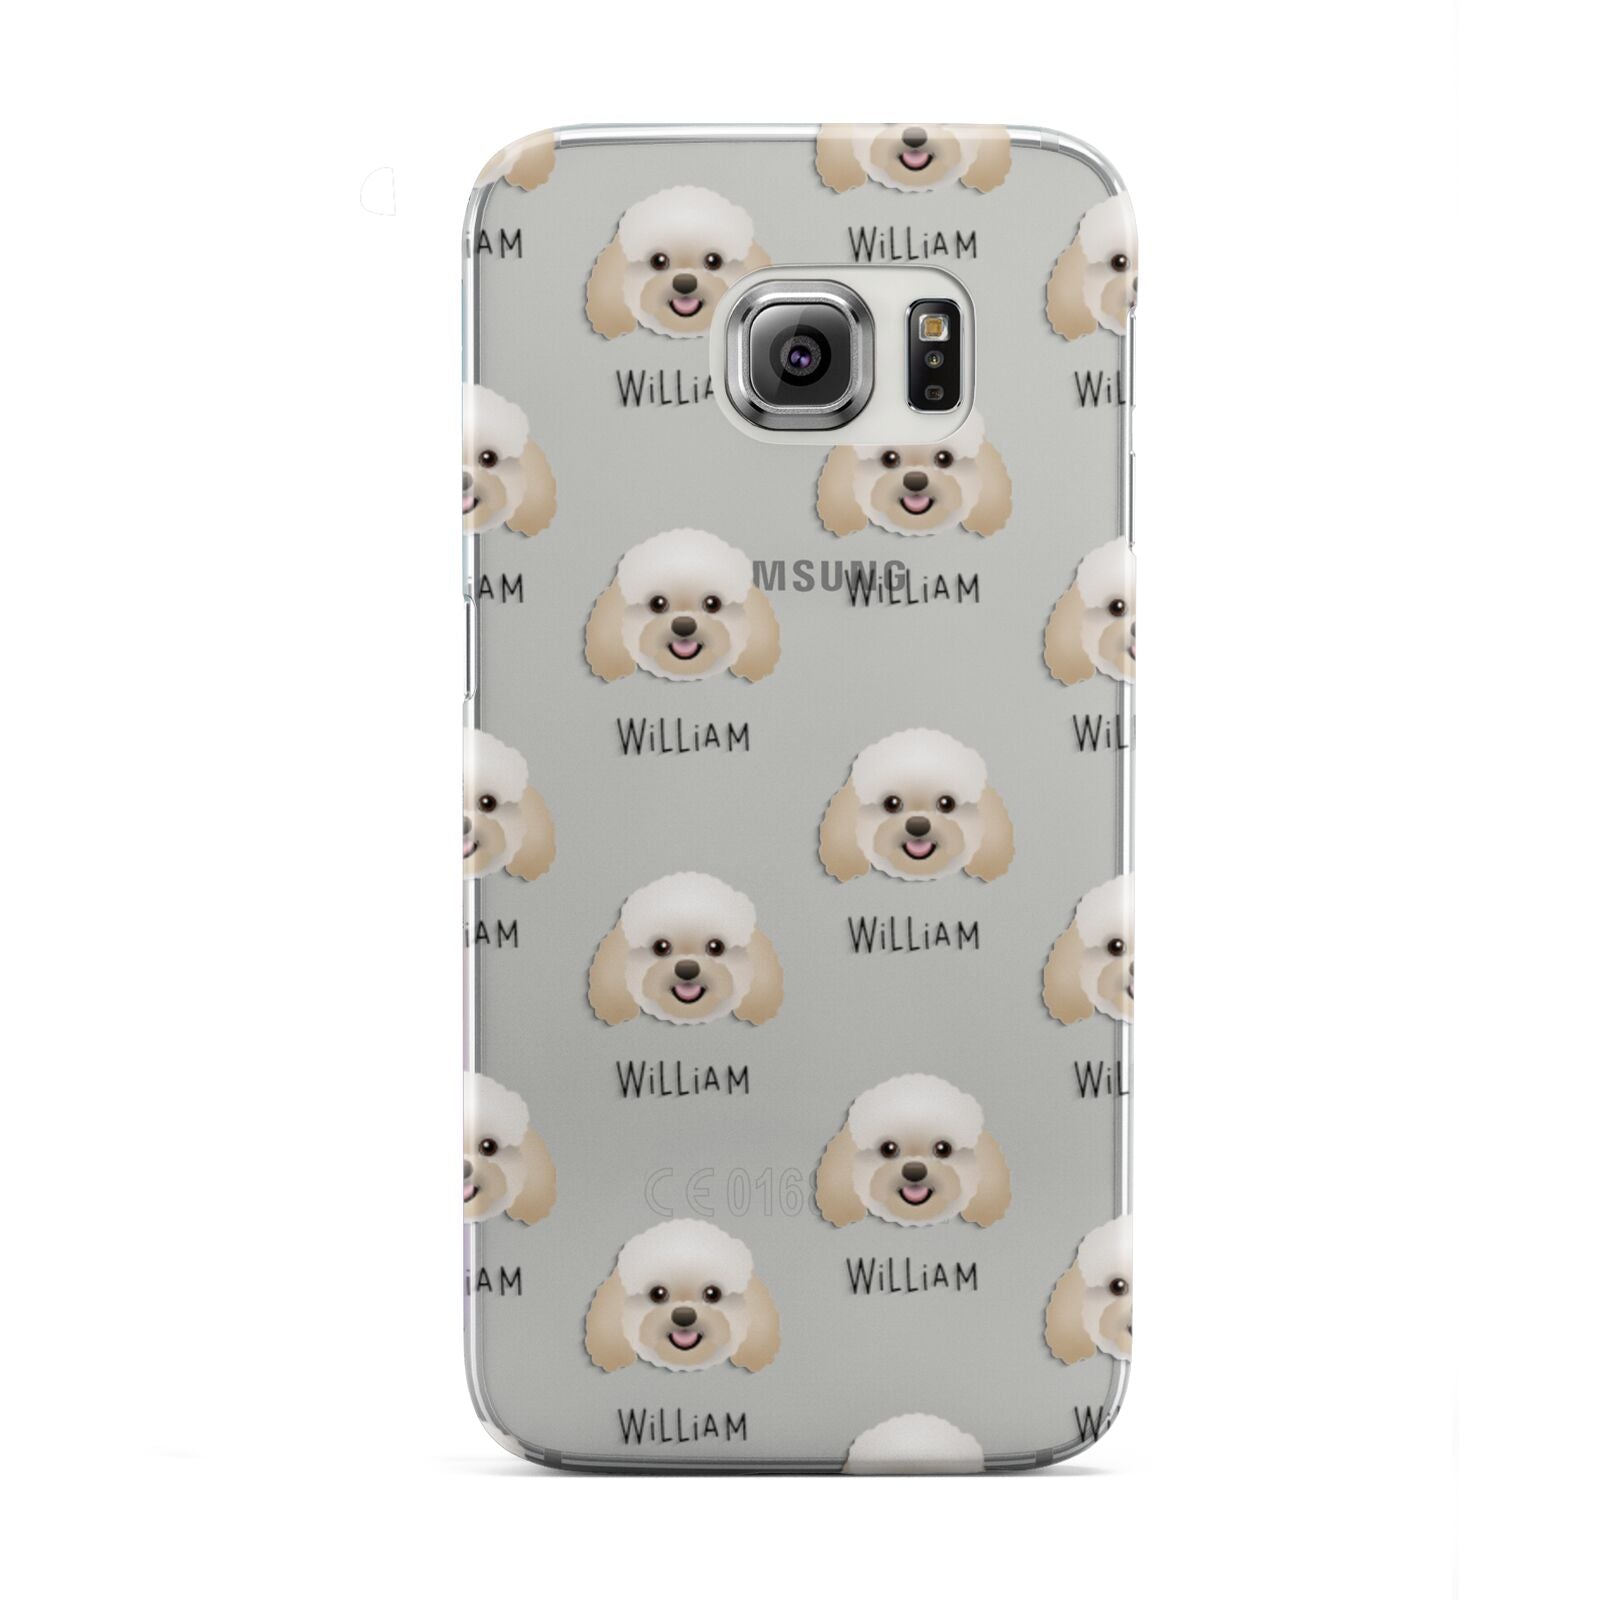 Bich poo Icon with Name Samsung Galaxy S6 Edge Case